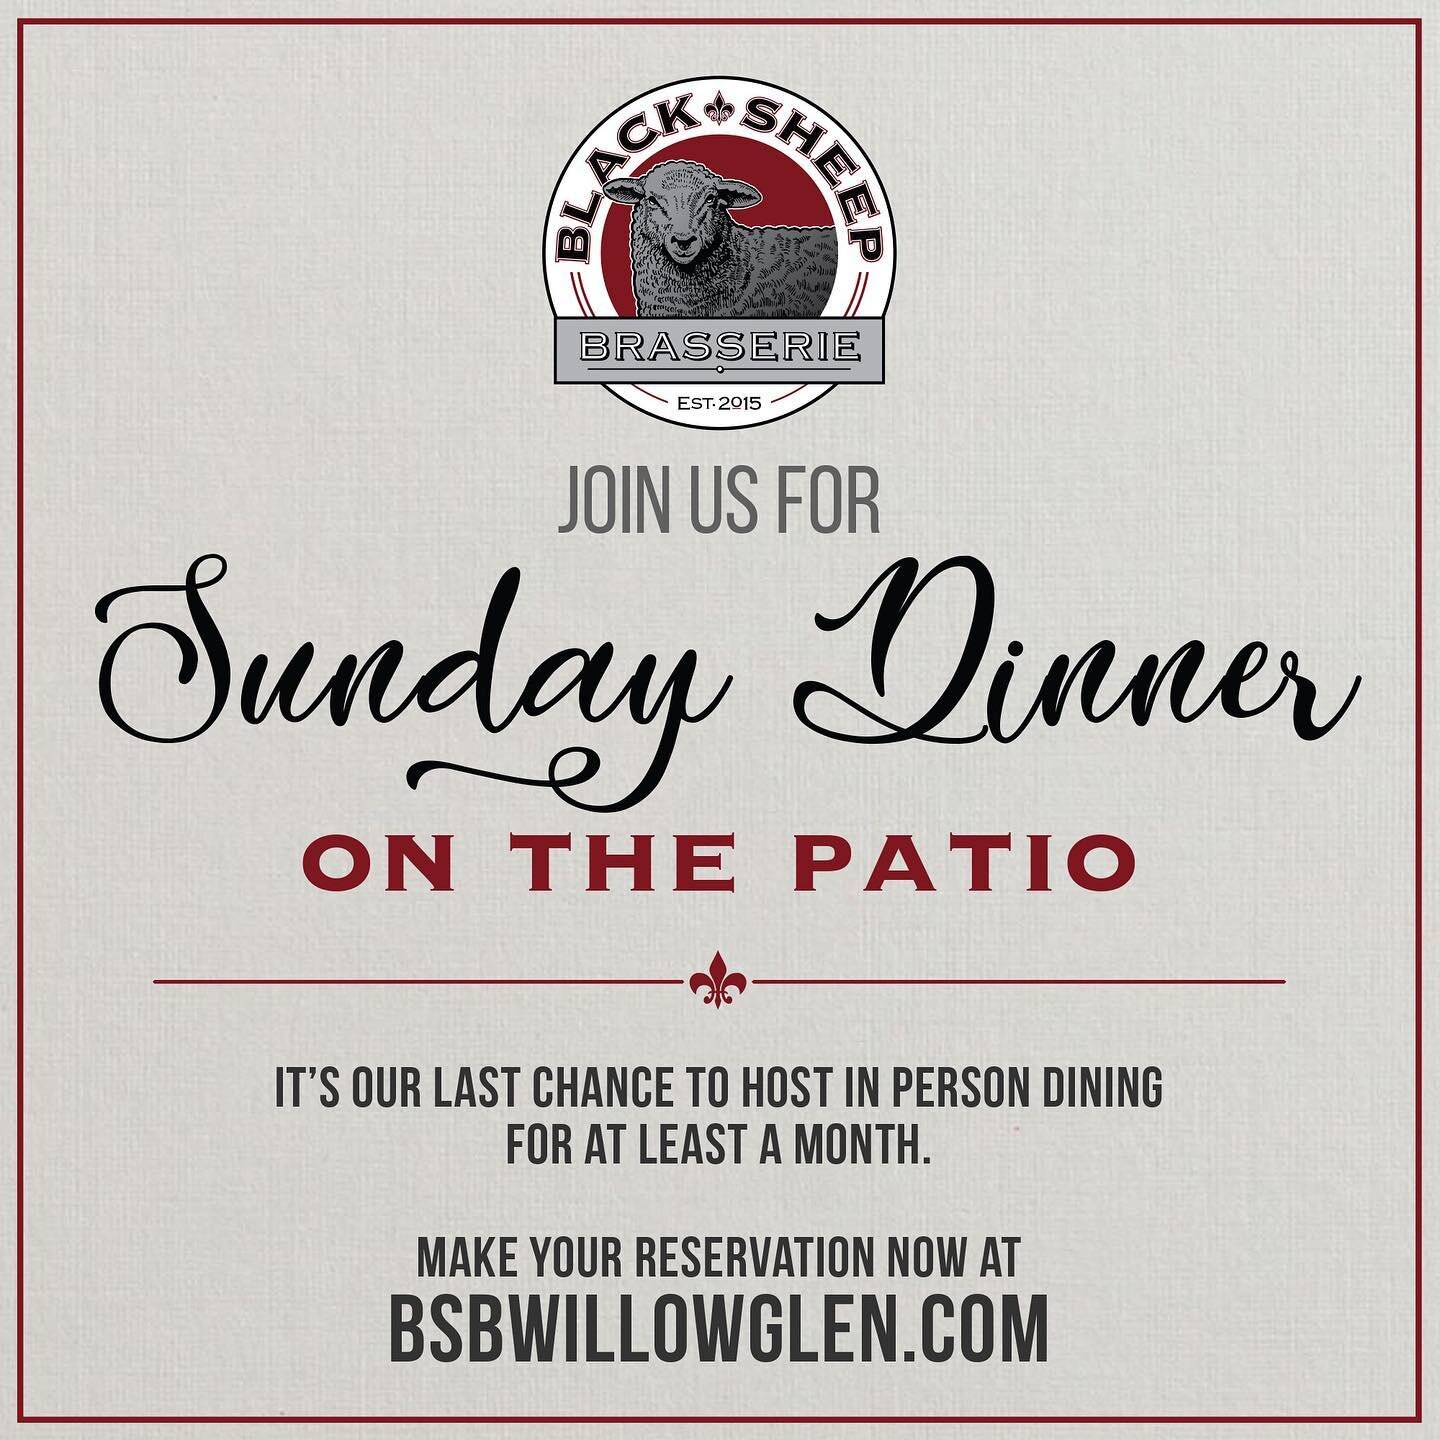 Well, we are going back to where this all began back in March. 

With that said we get one last weekend to host you on our patio, which means we are opening up Sunday the 6th, 5pm-8pm for both patio dining and curbside pick-up! Click the &ldquo;reser